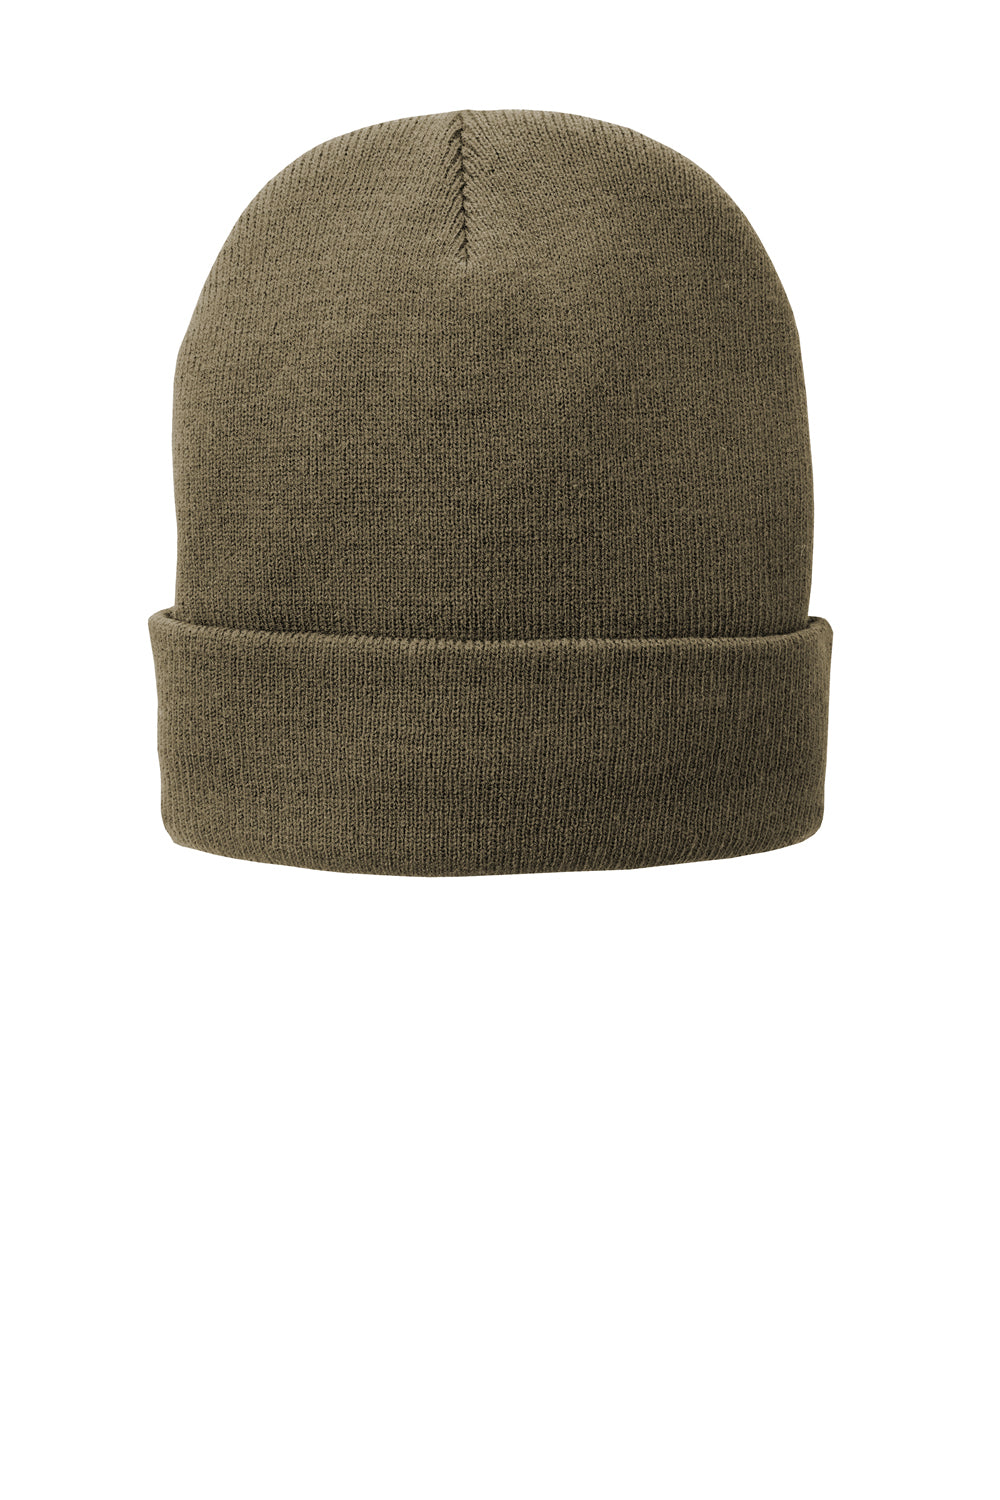 Port & Company CP90L Fleece Lined Knit Beanie Coyote Brown  Front